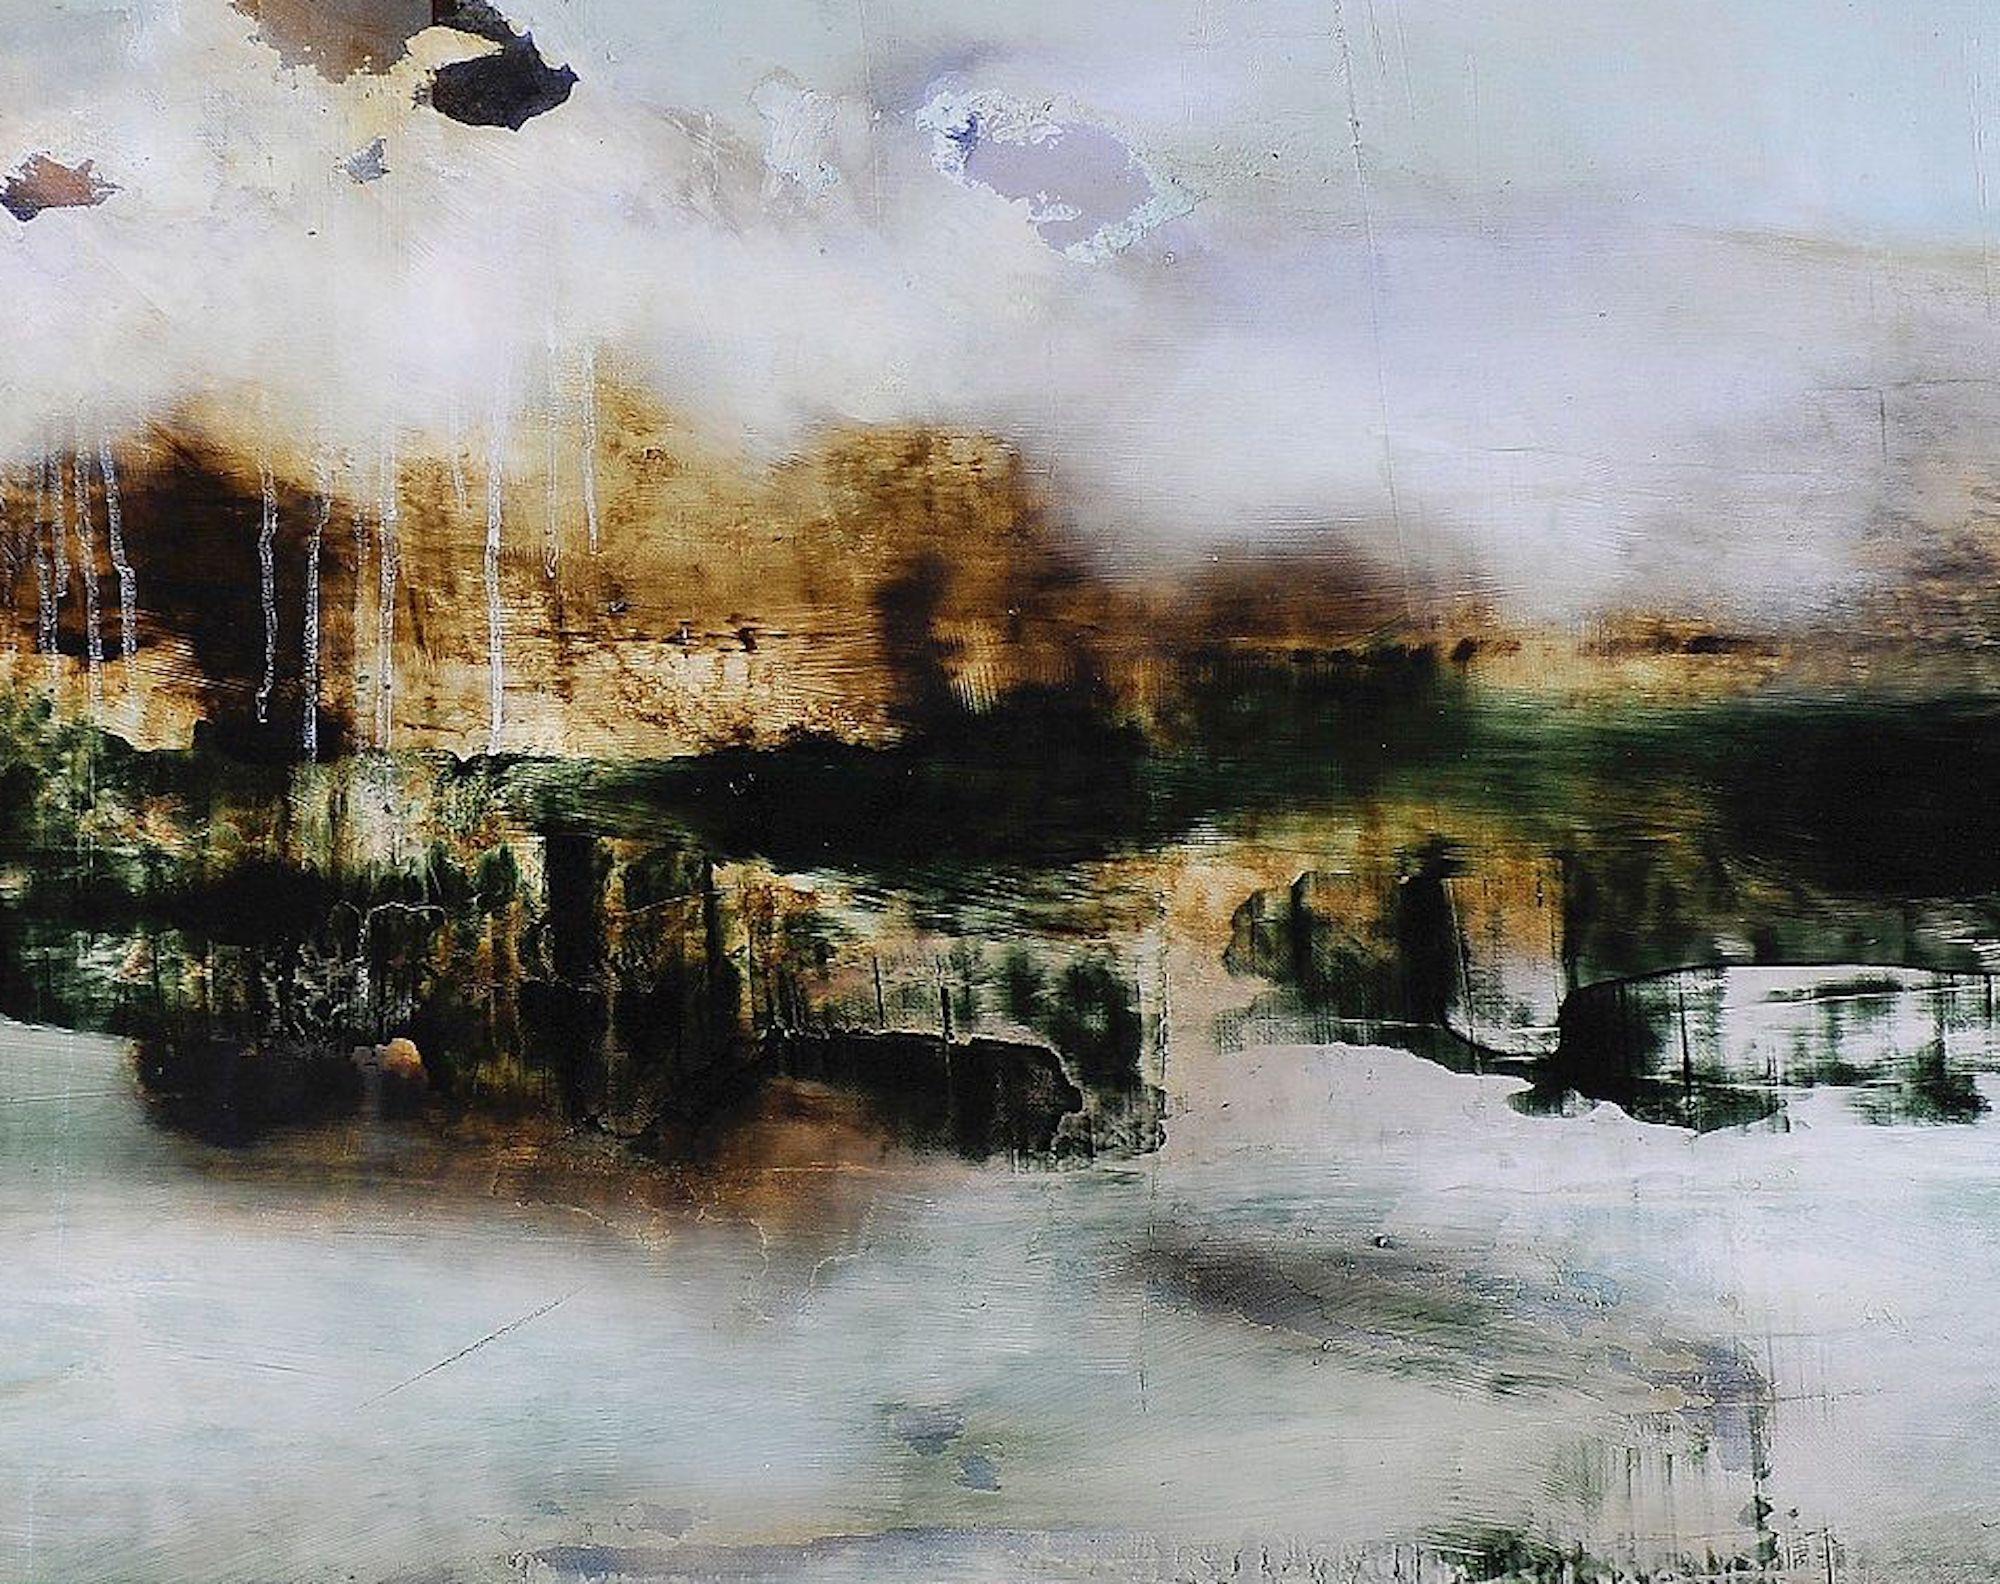 The Distant King III by Joachim van der Vlugt - Semi-abstract painting, mountain For Sale 4